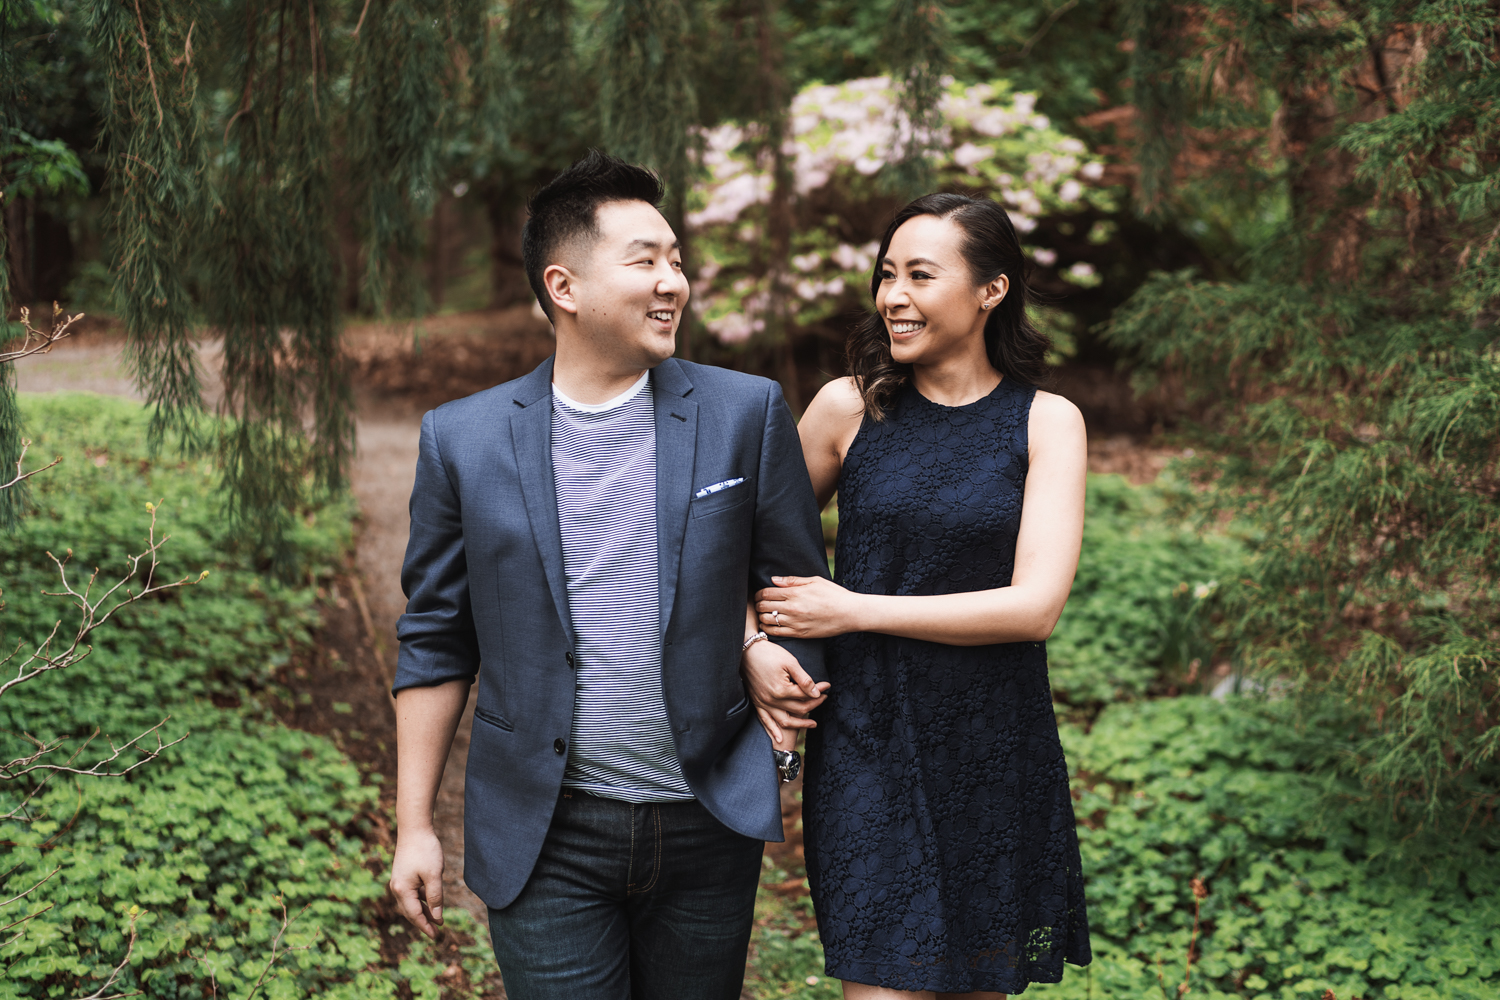 stanley park engagement photography in vancouver bc in spring with cherry blossoms